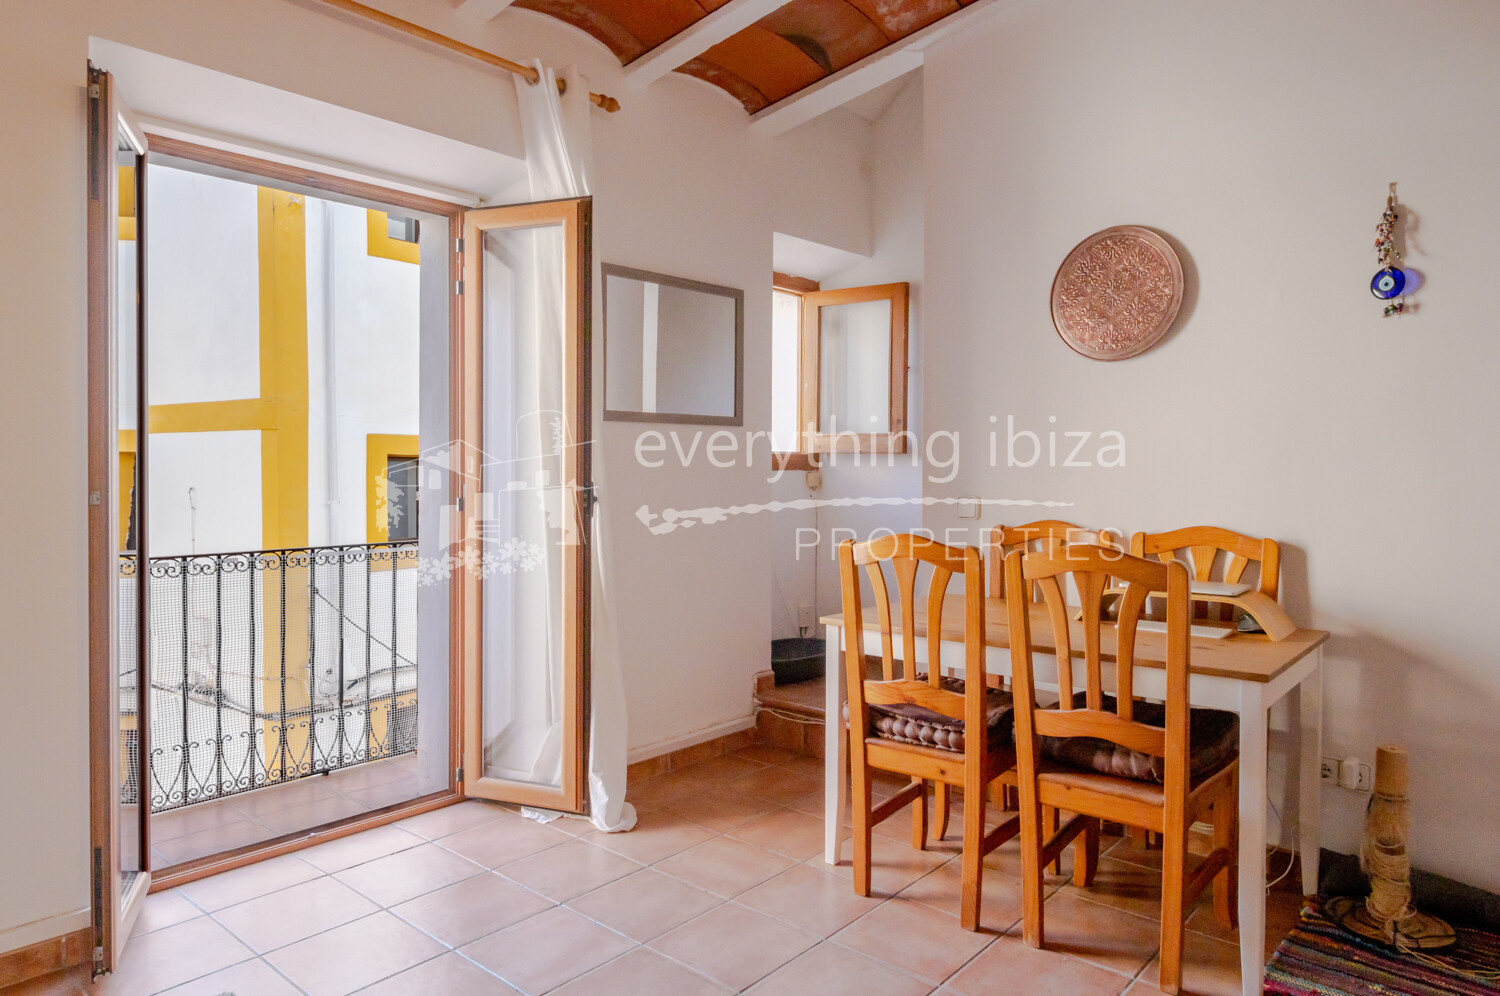 Modernised Apartment in Exclusive Area of Old Ibiza Town Centre, ref. 1652, for sale in Ibiza by everything ibiza Properties